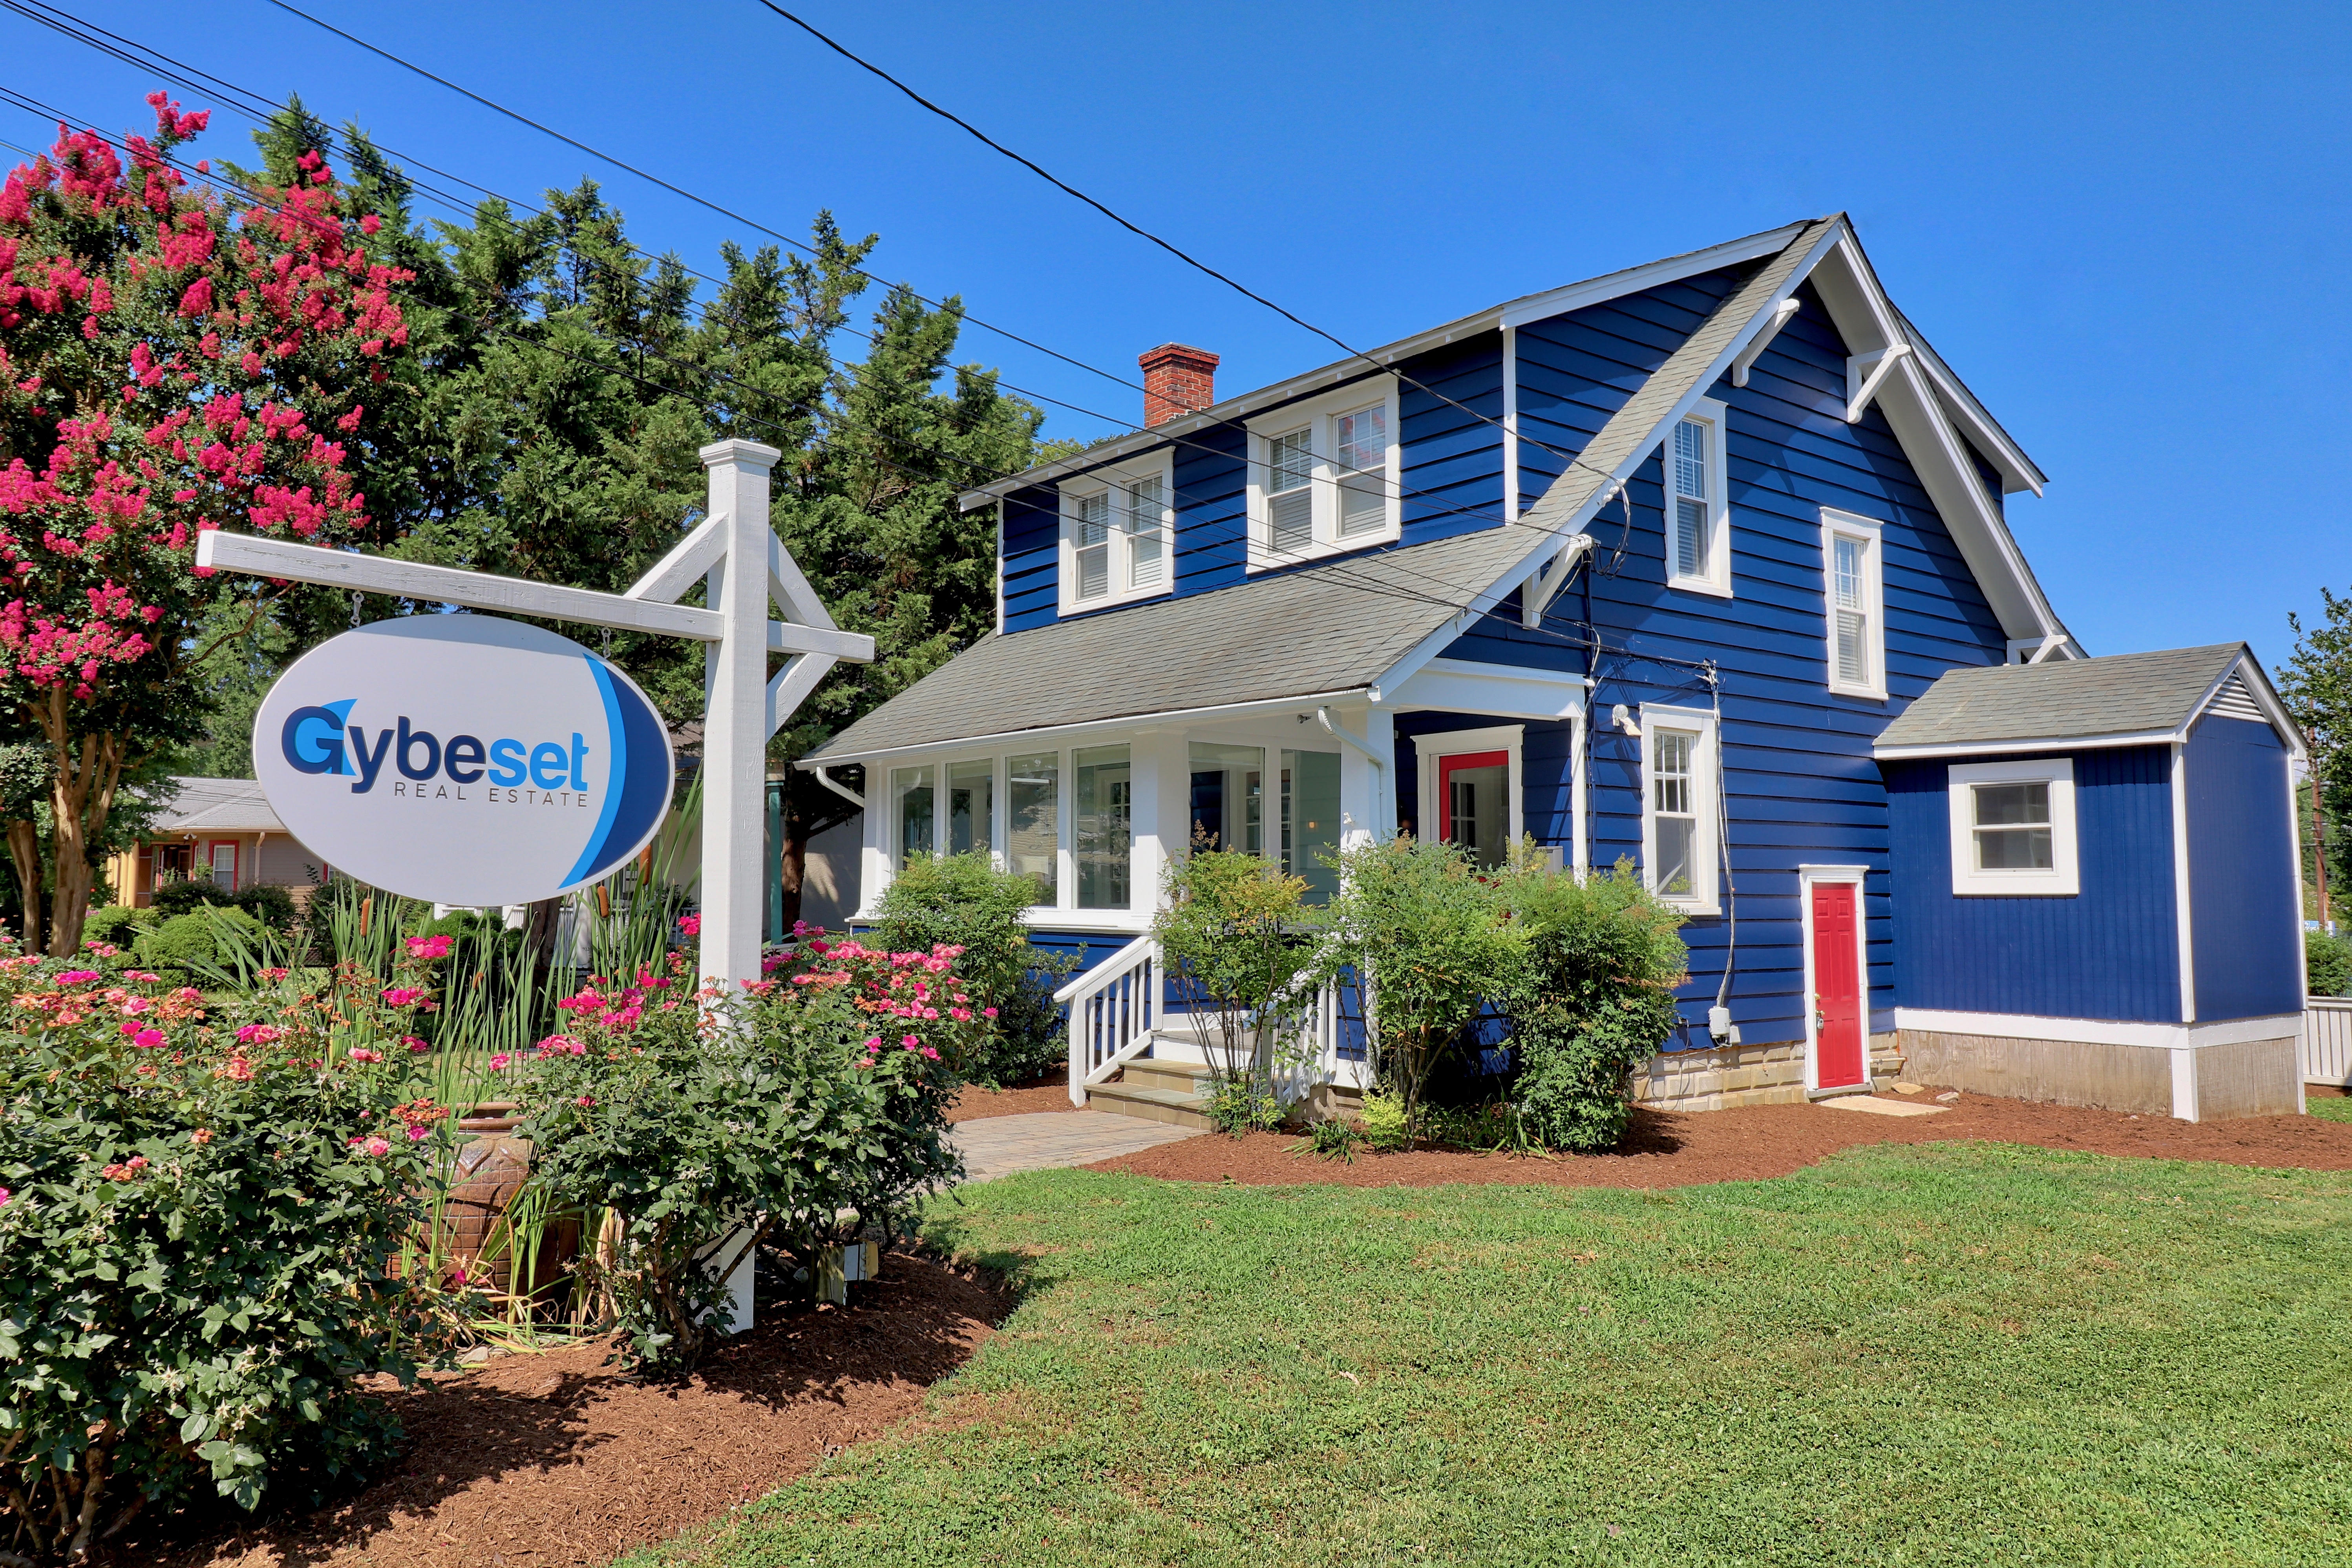 Gybeset Homes - EAnnapolis Office